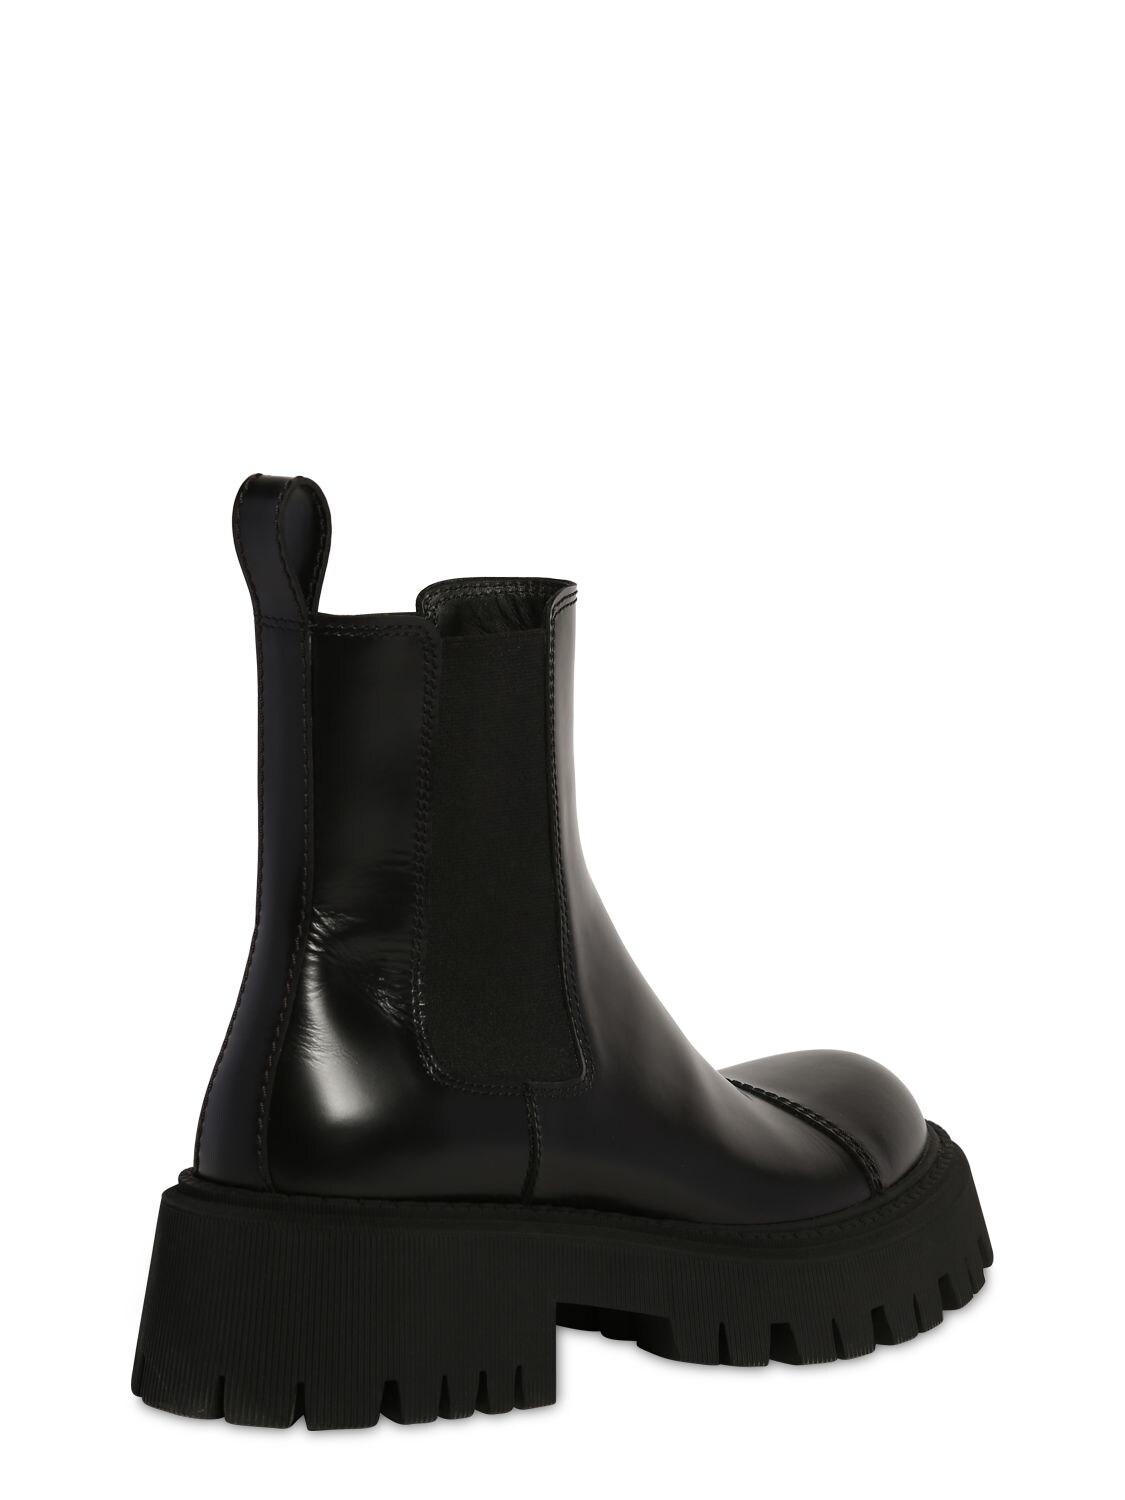 Balenciaga Tractor Bootie L20 Leather Boots in Black for Men - Lyst